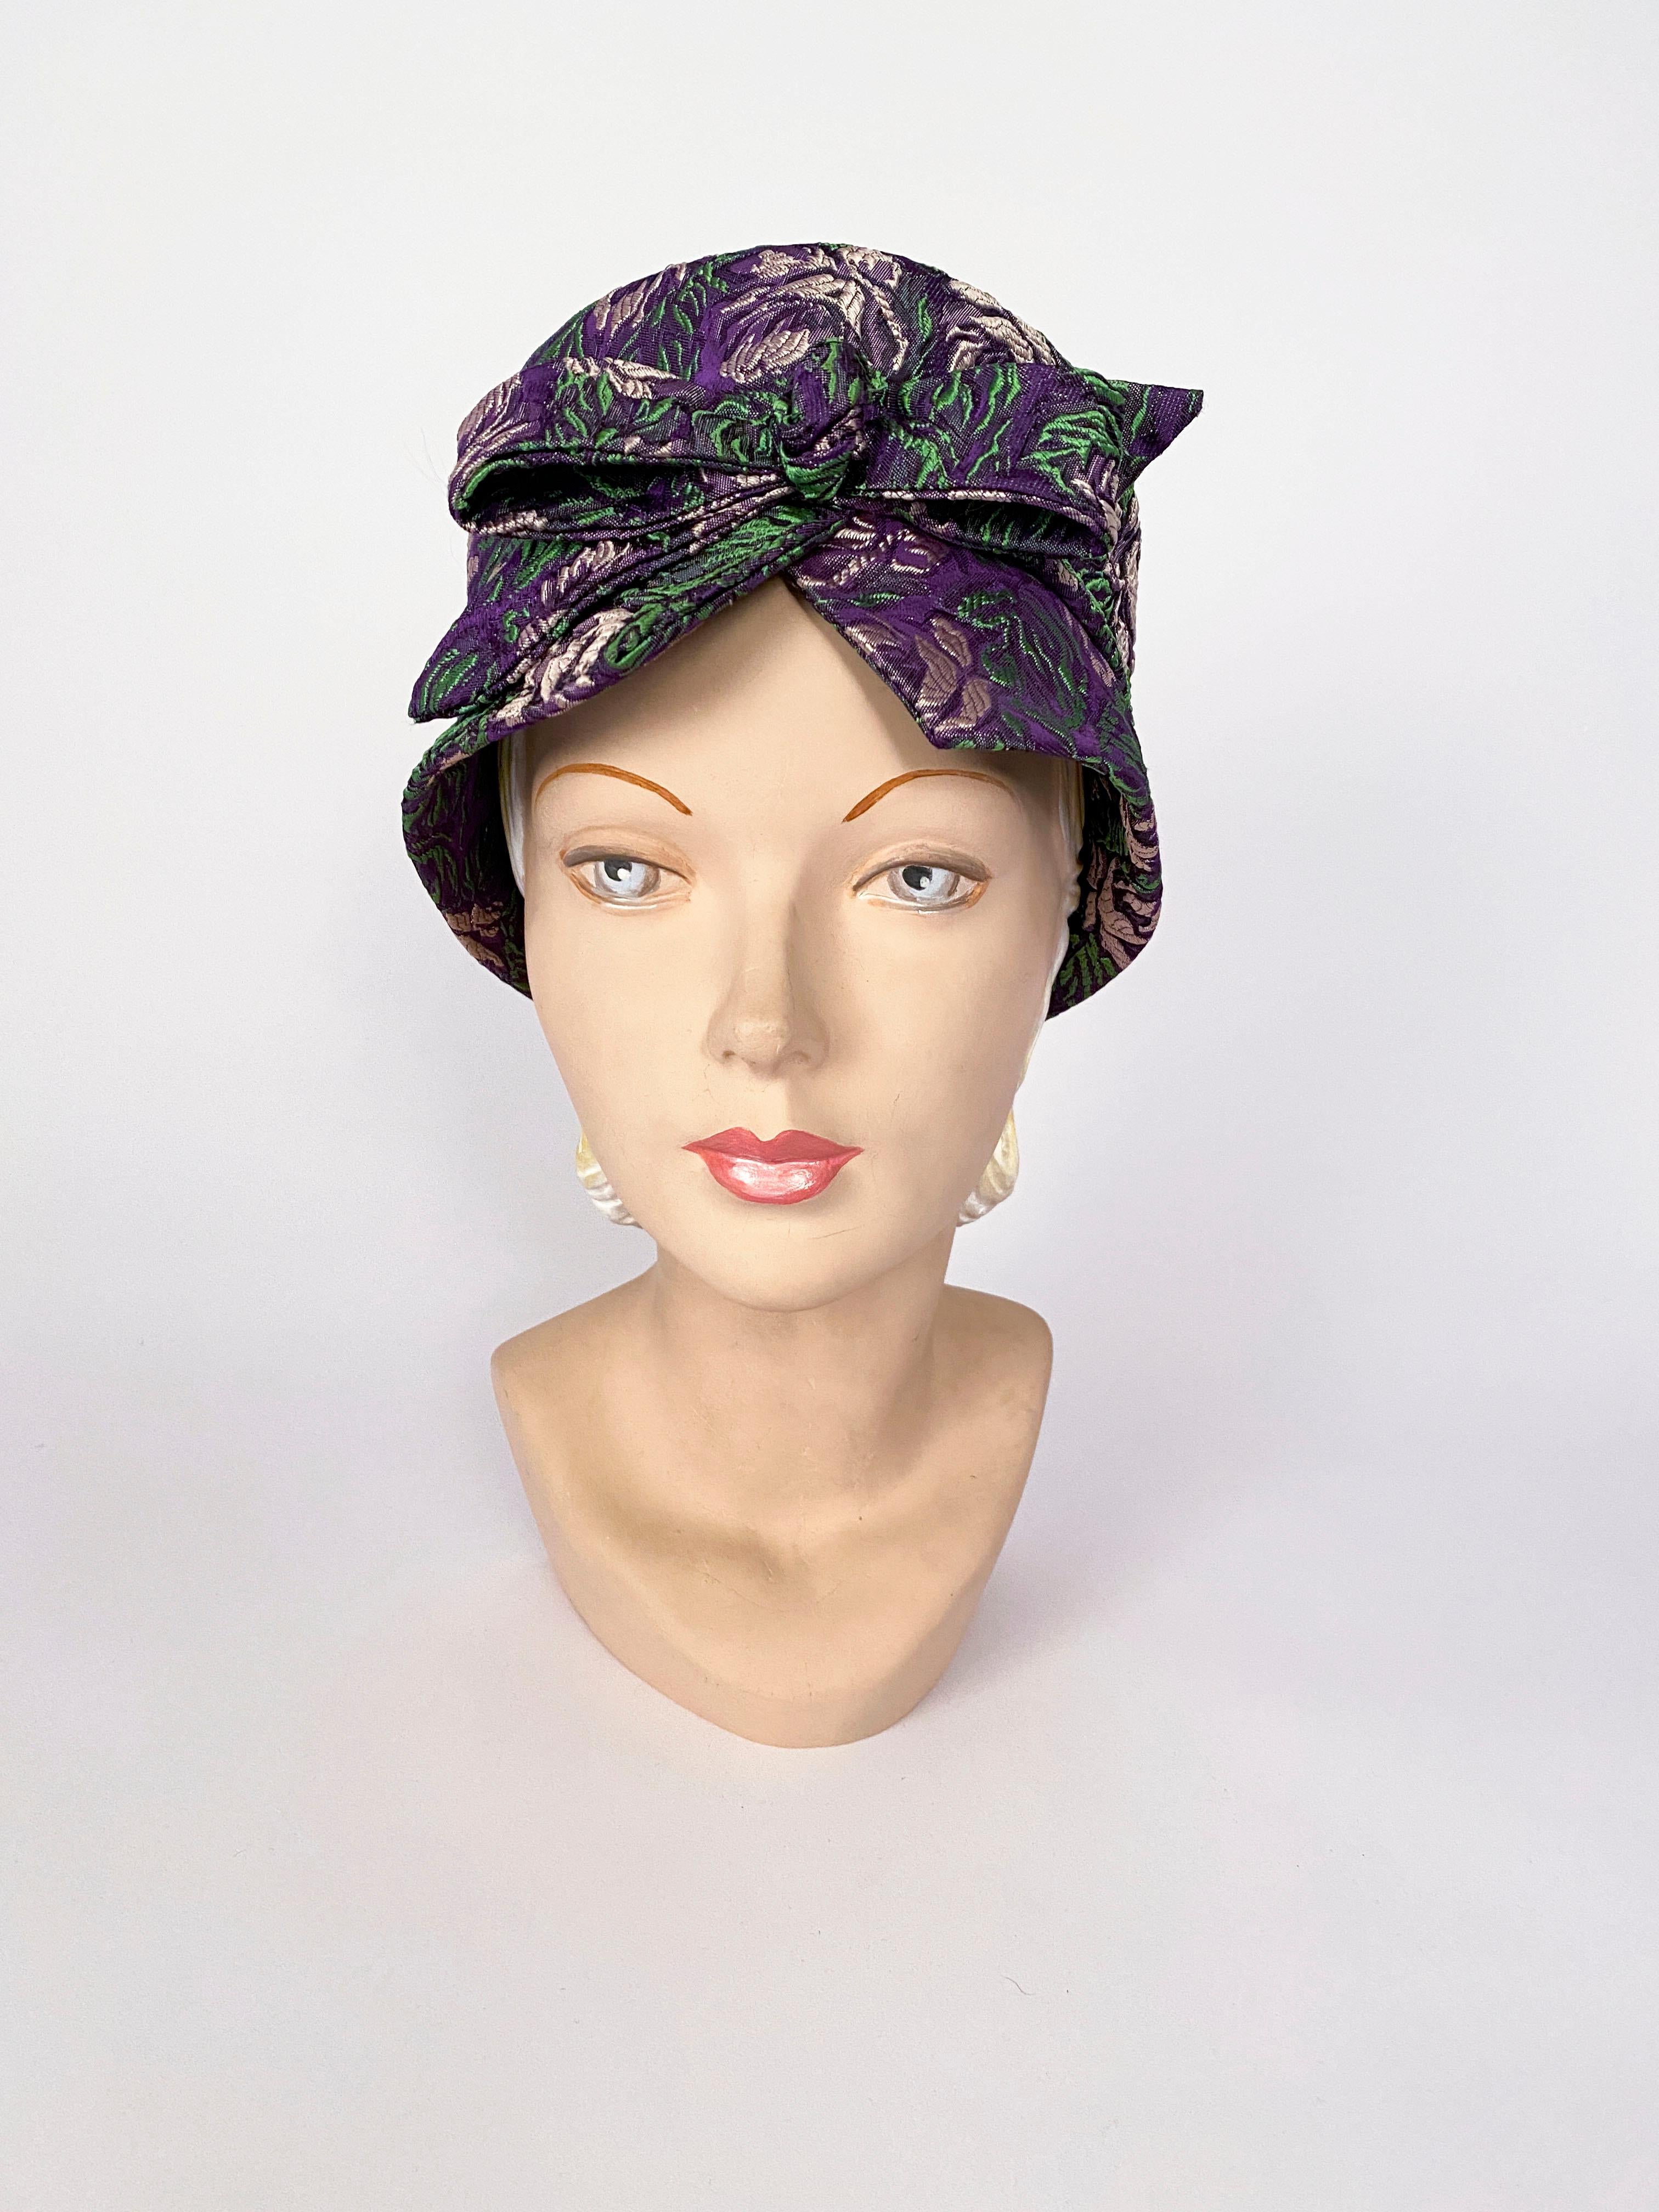 1960s Mr. John purple hat with a turban-like structure. The entire hat is made of a textured floral brocade with undertones of lavender and green. This hat is finished with a large tied bow.